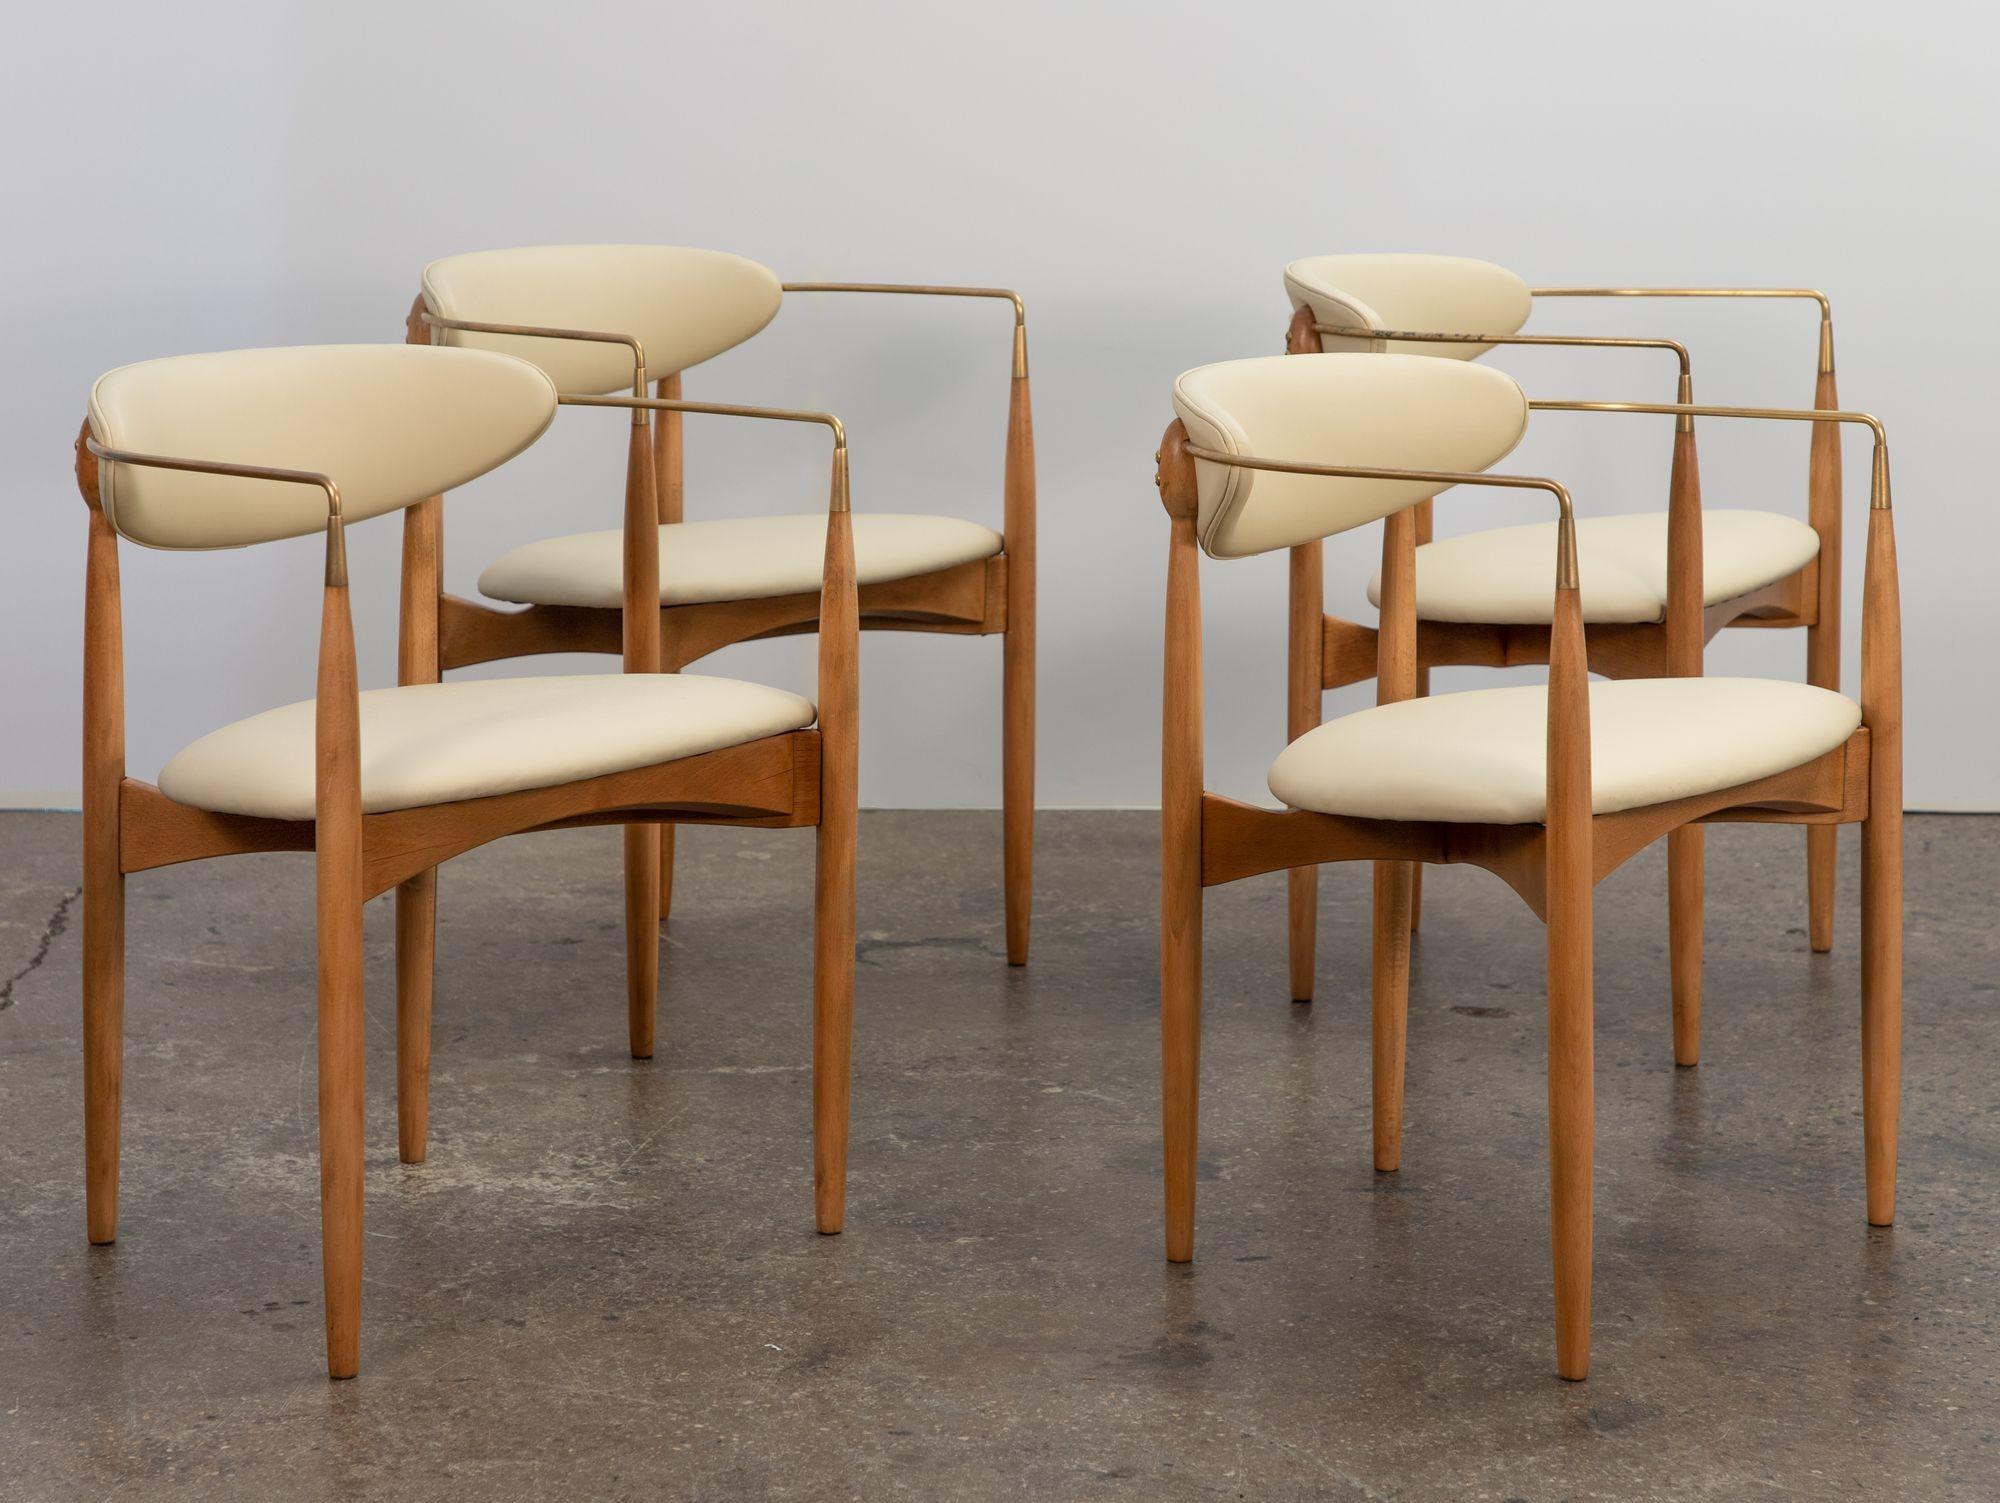 A gorgeous set of dining chairs, designed by Dan Johnson for Selig. Curvilinear form, with sweeping arms made of solid brass. Elegant tapered legs are finely carved from bleached wood. In beautiful condition, these have been restored with great care